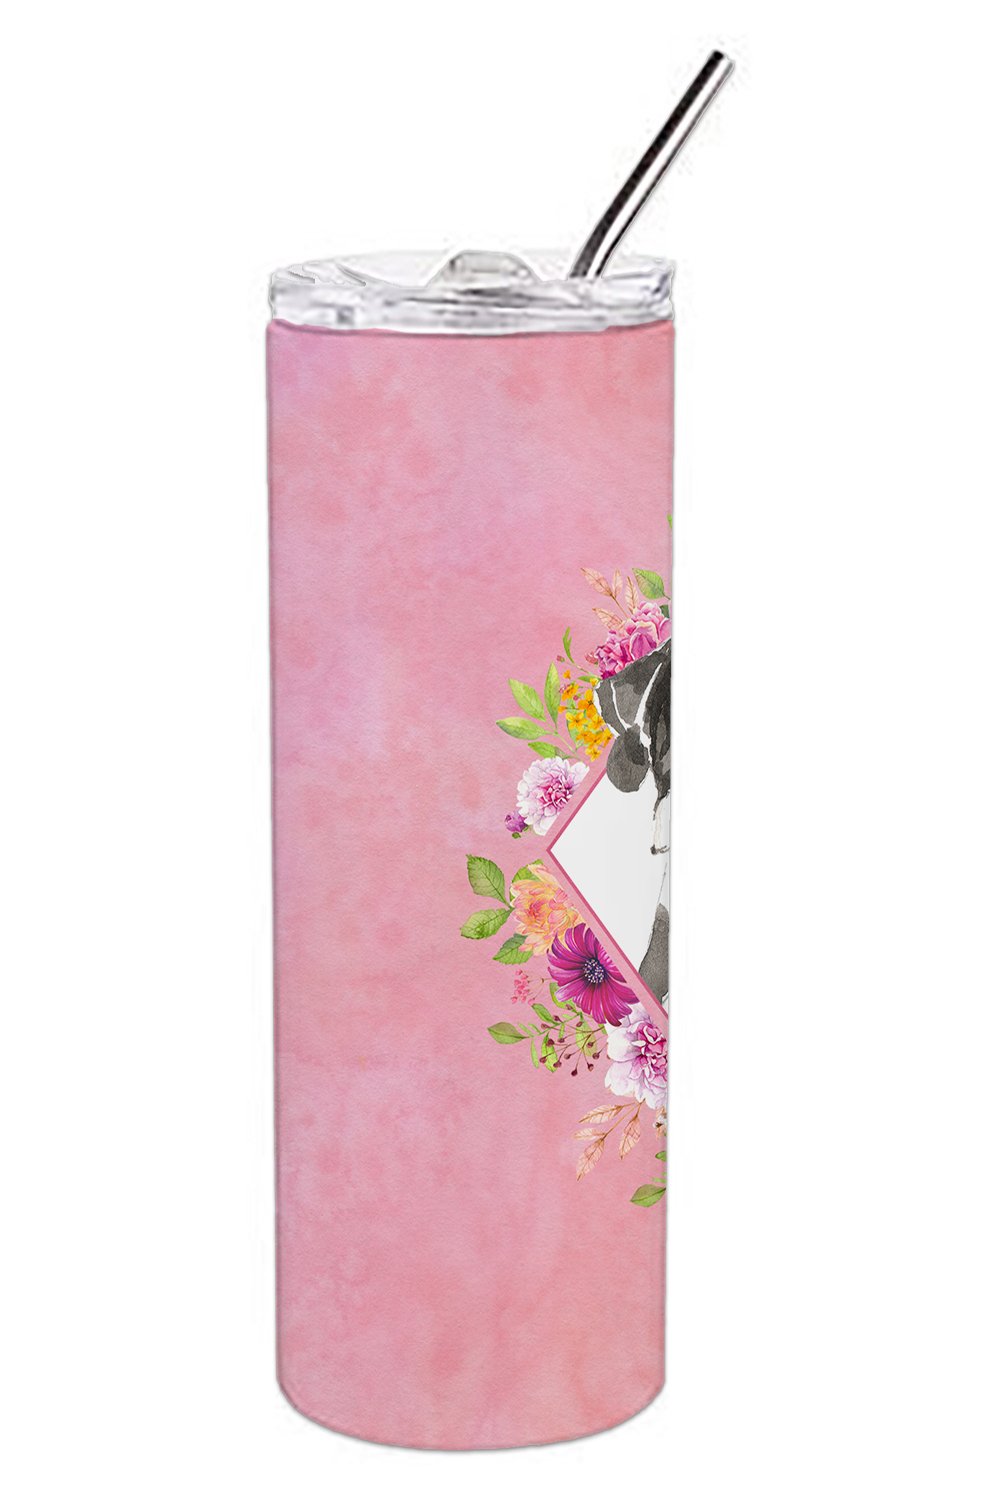 English Pointer Pink Flowers Double Walled Stainless Steel 20 oz Skinny Tumbler CK4239TBL20 by Caroline's Treasures